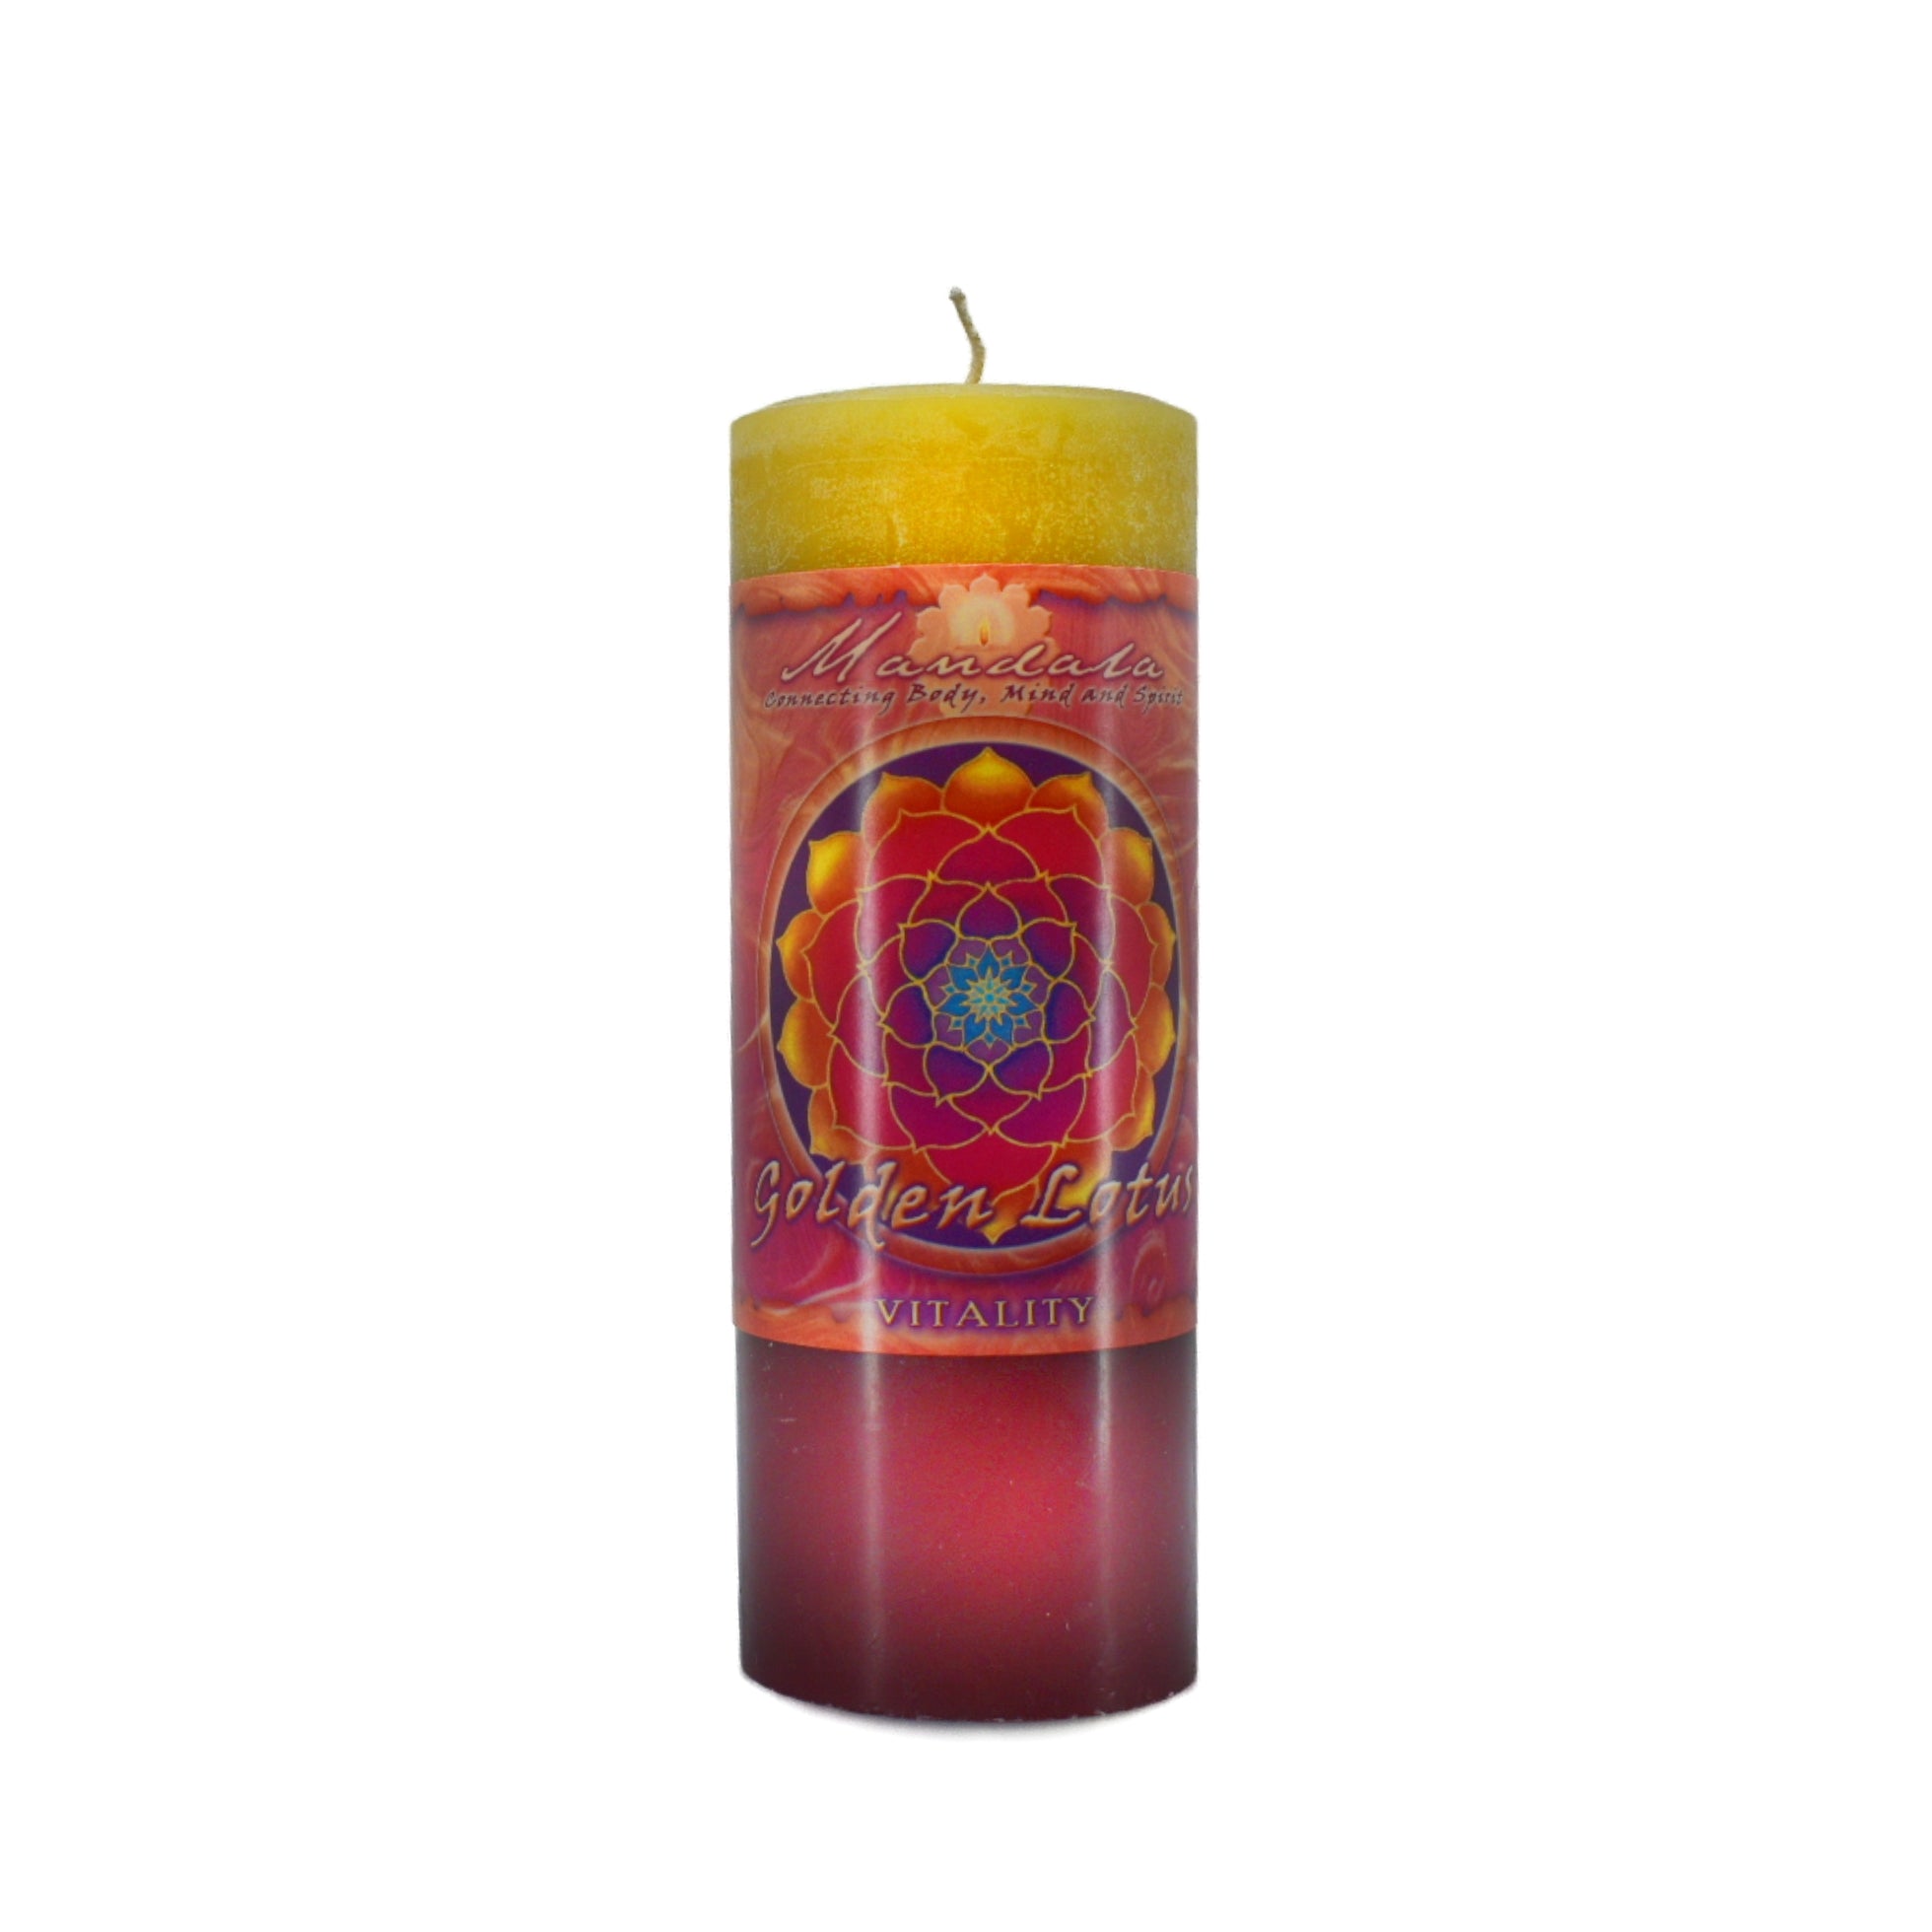 Vitality Mandala Candle.  This scented candle is made with zesty citrus, wild bergamot, ginger root, and tangerine essential oils it is yellow and then red.  Burn this candle to help promote self-determination, inner power, vitality, prosperity, success and abundance, and active or Yang energy.